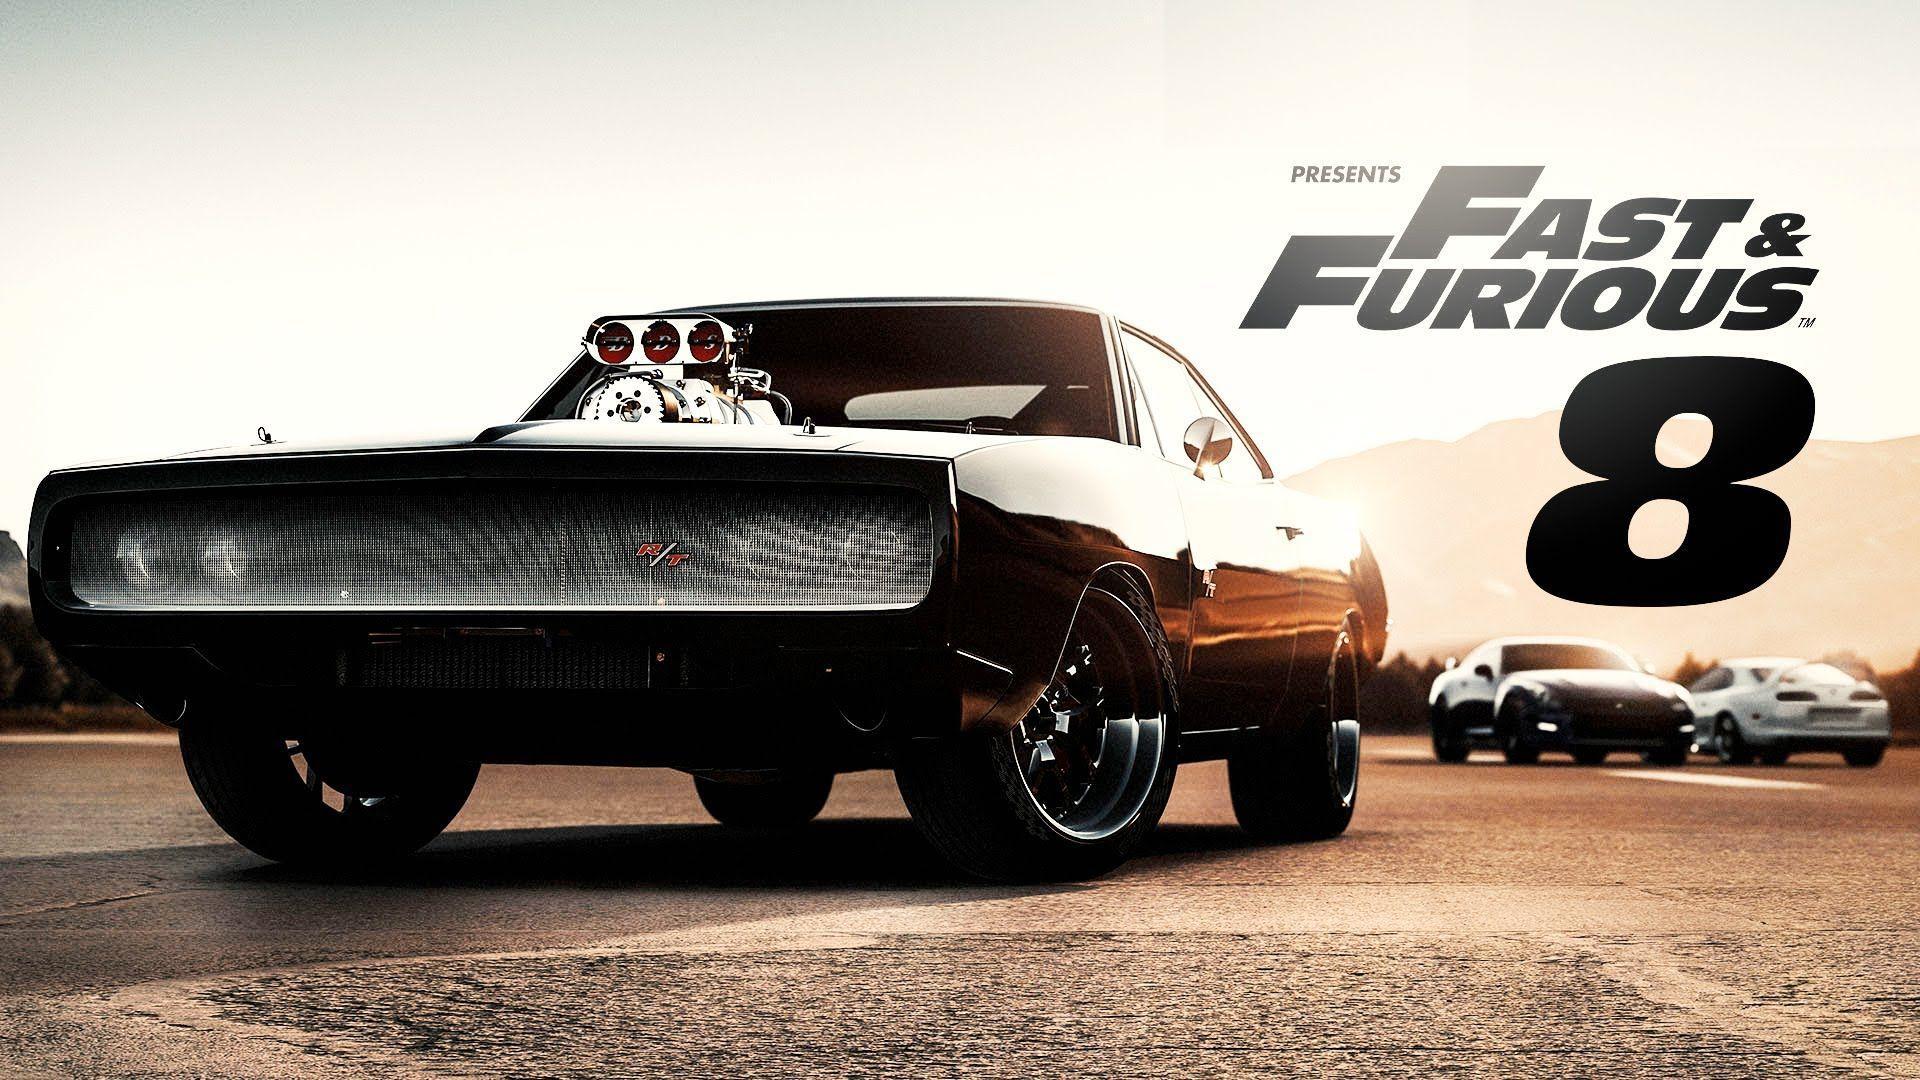 Fast and Furious 8 Wallpaper Free Fast and Furious 8 Background